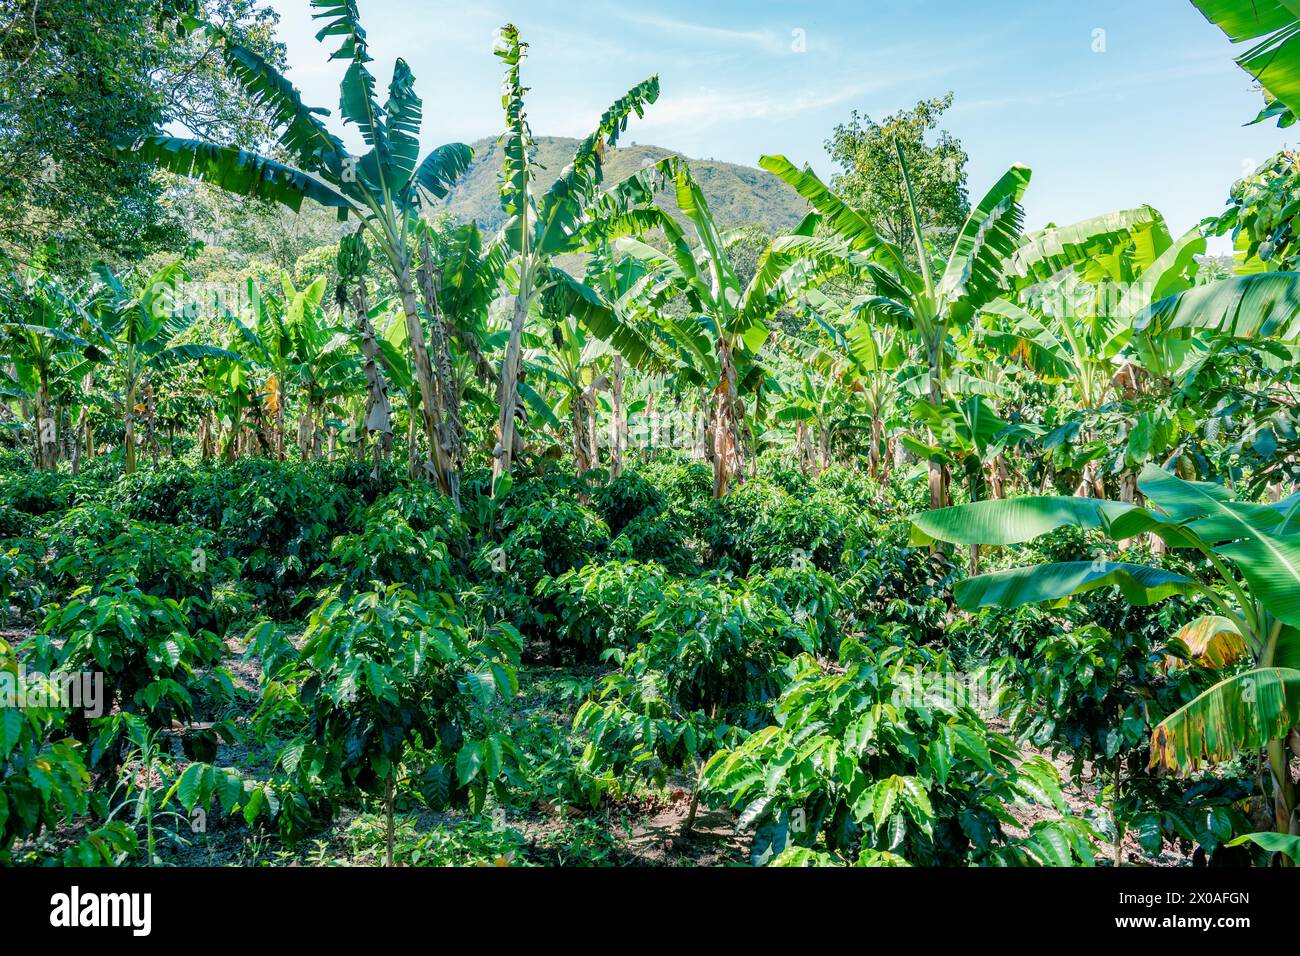 general view of a coffee and banana plantation in the mountains of Colombia Stock Photo